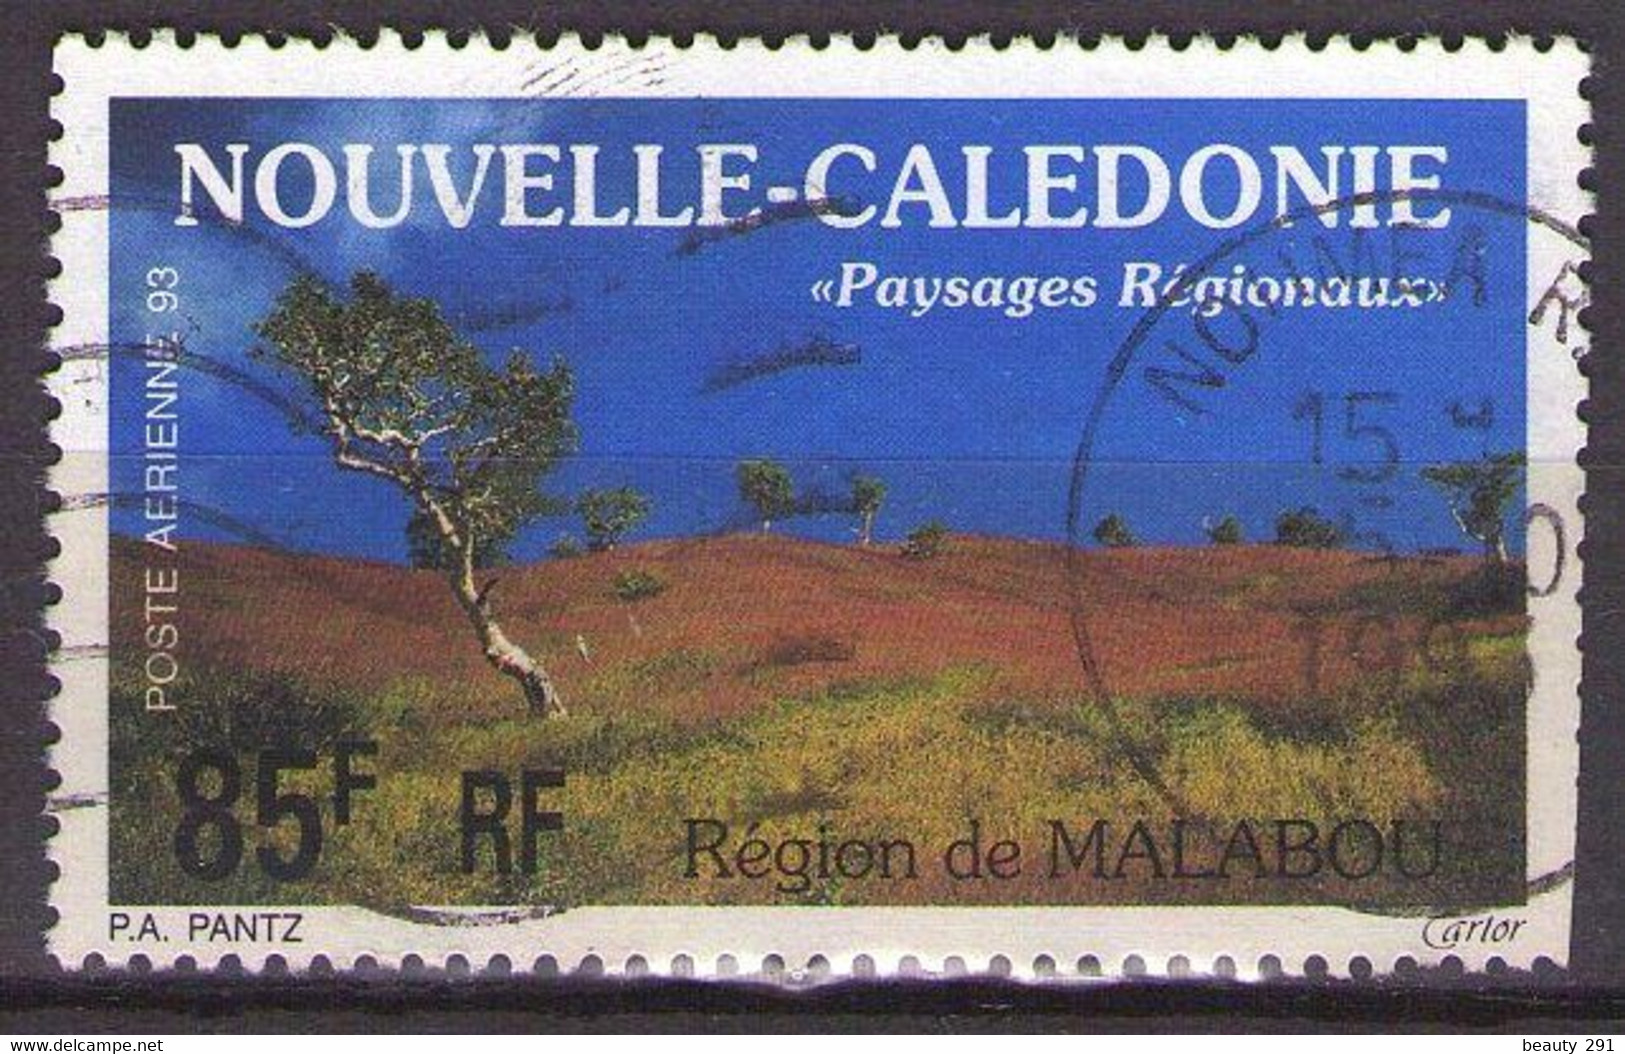 NOUVELLE CALEDONIE - POSTE AERIENNE  1993  Mi 961   USED - Used Stamps